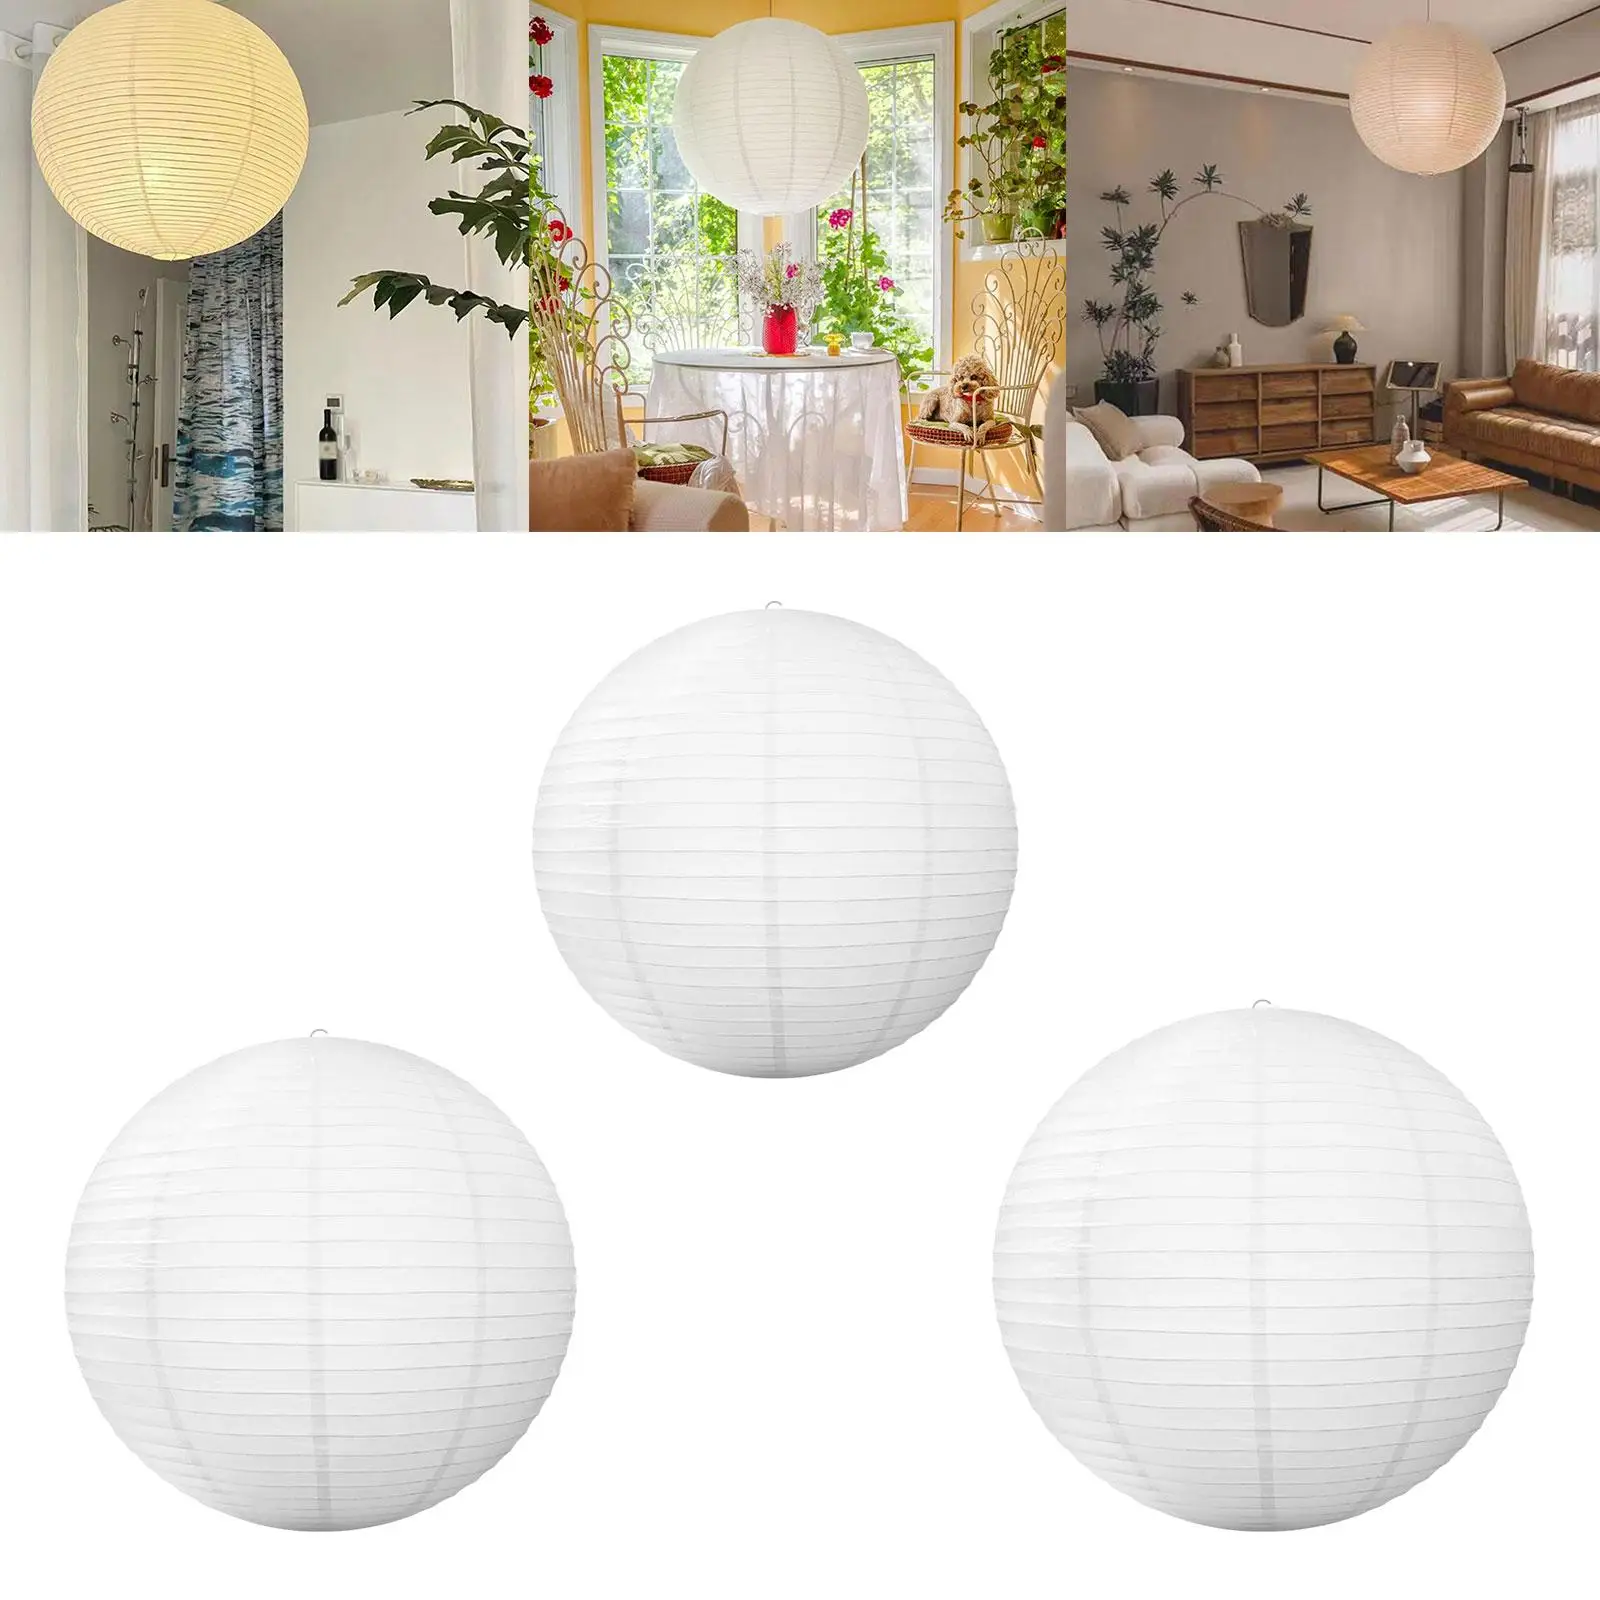 Rice Paper Lamp Shade Bulb Guard Cage Chinese Light Fixture Shade Creative Chandelier Cover for Dorm Bedroom Office Home Wedding